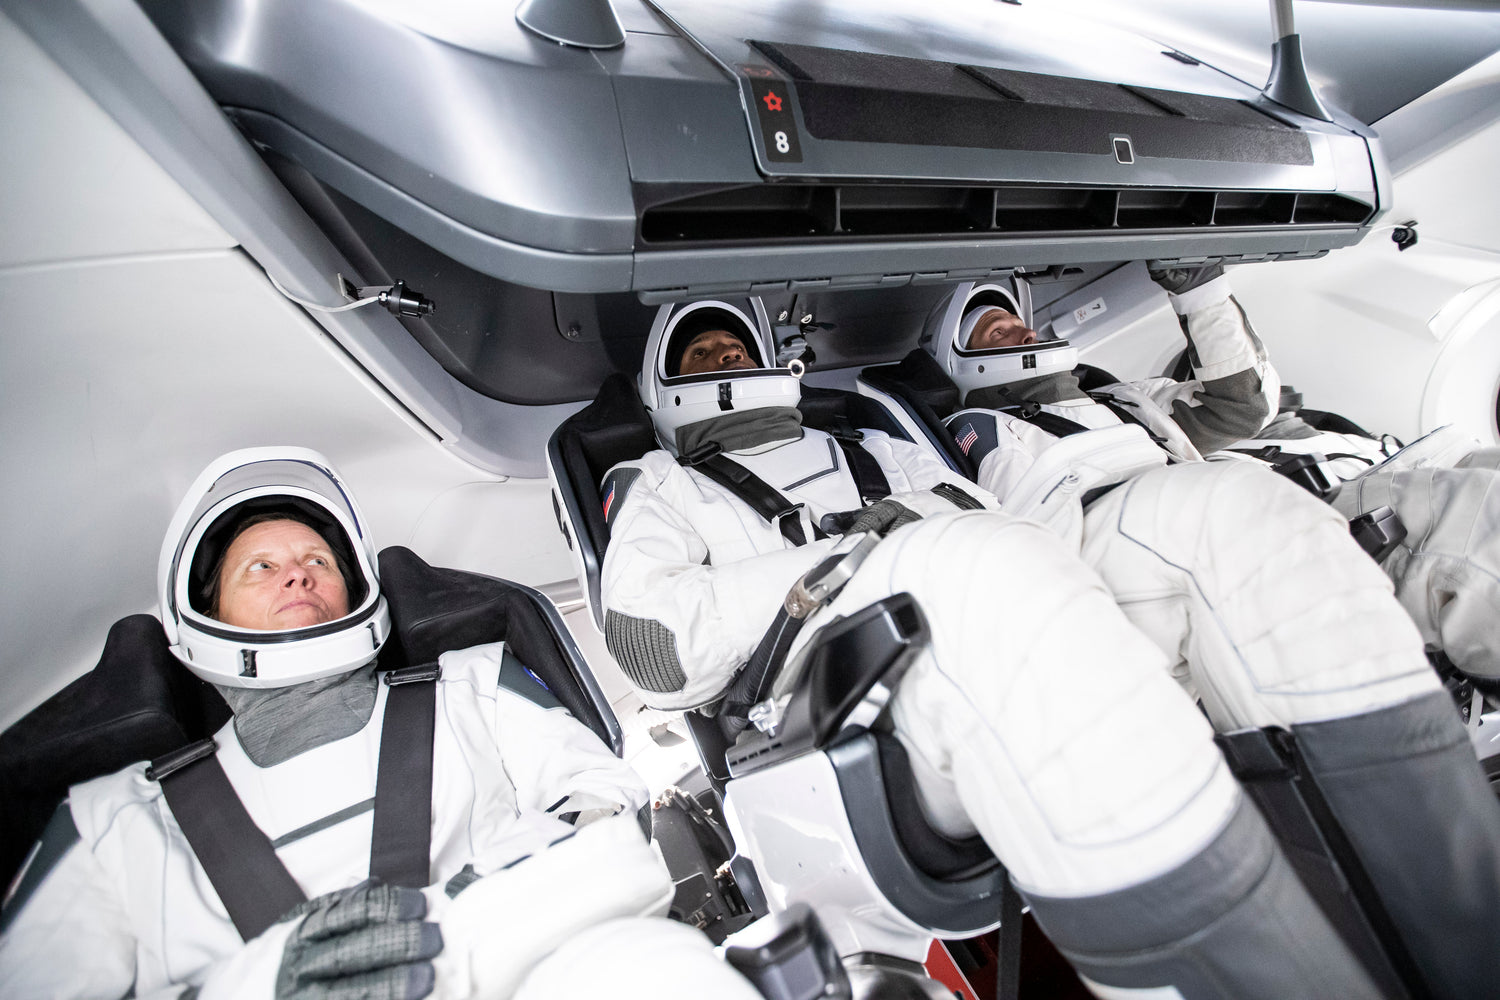 SpaceX will launch four Astronauts aboard Crew Dragon to the Space Station soon